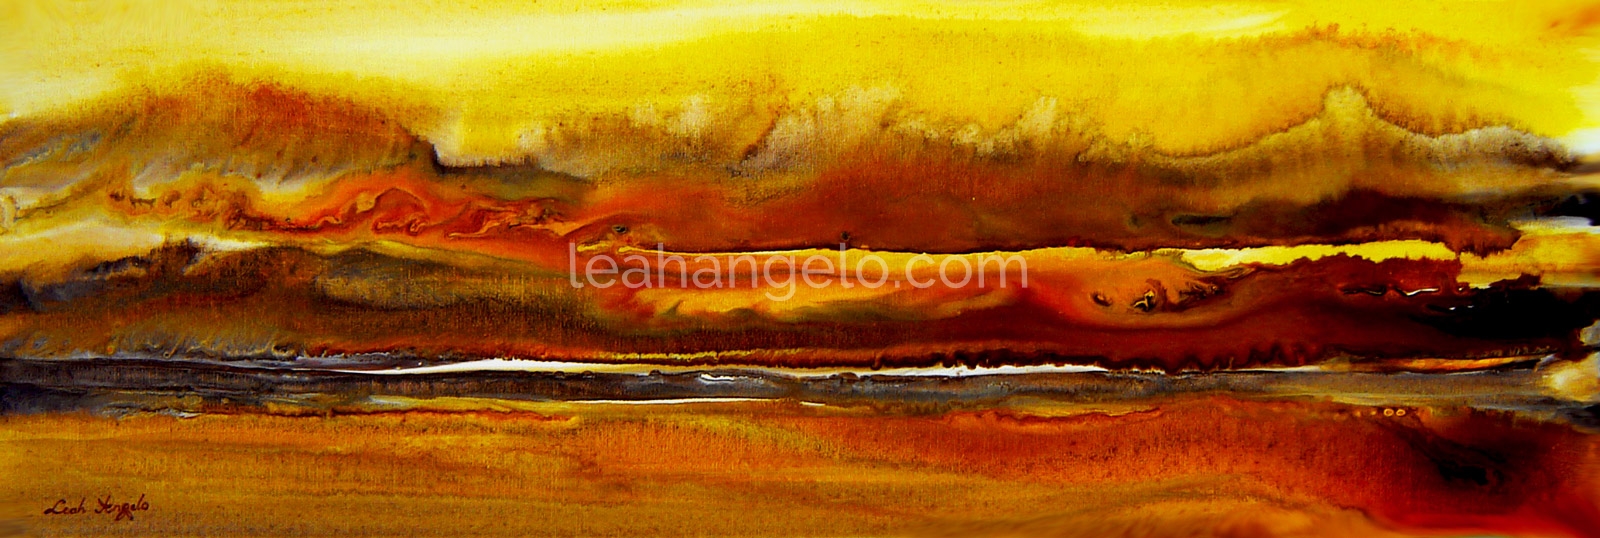 GLOWING WAVES OF PASSION - acrylic on canvas (122x43 cm) - Leah Angelo